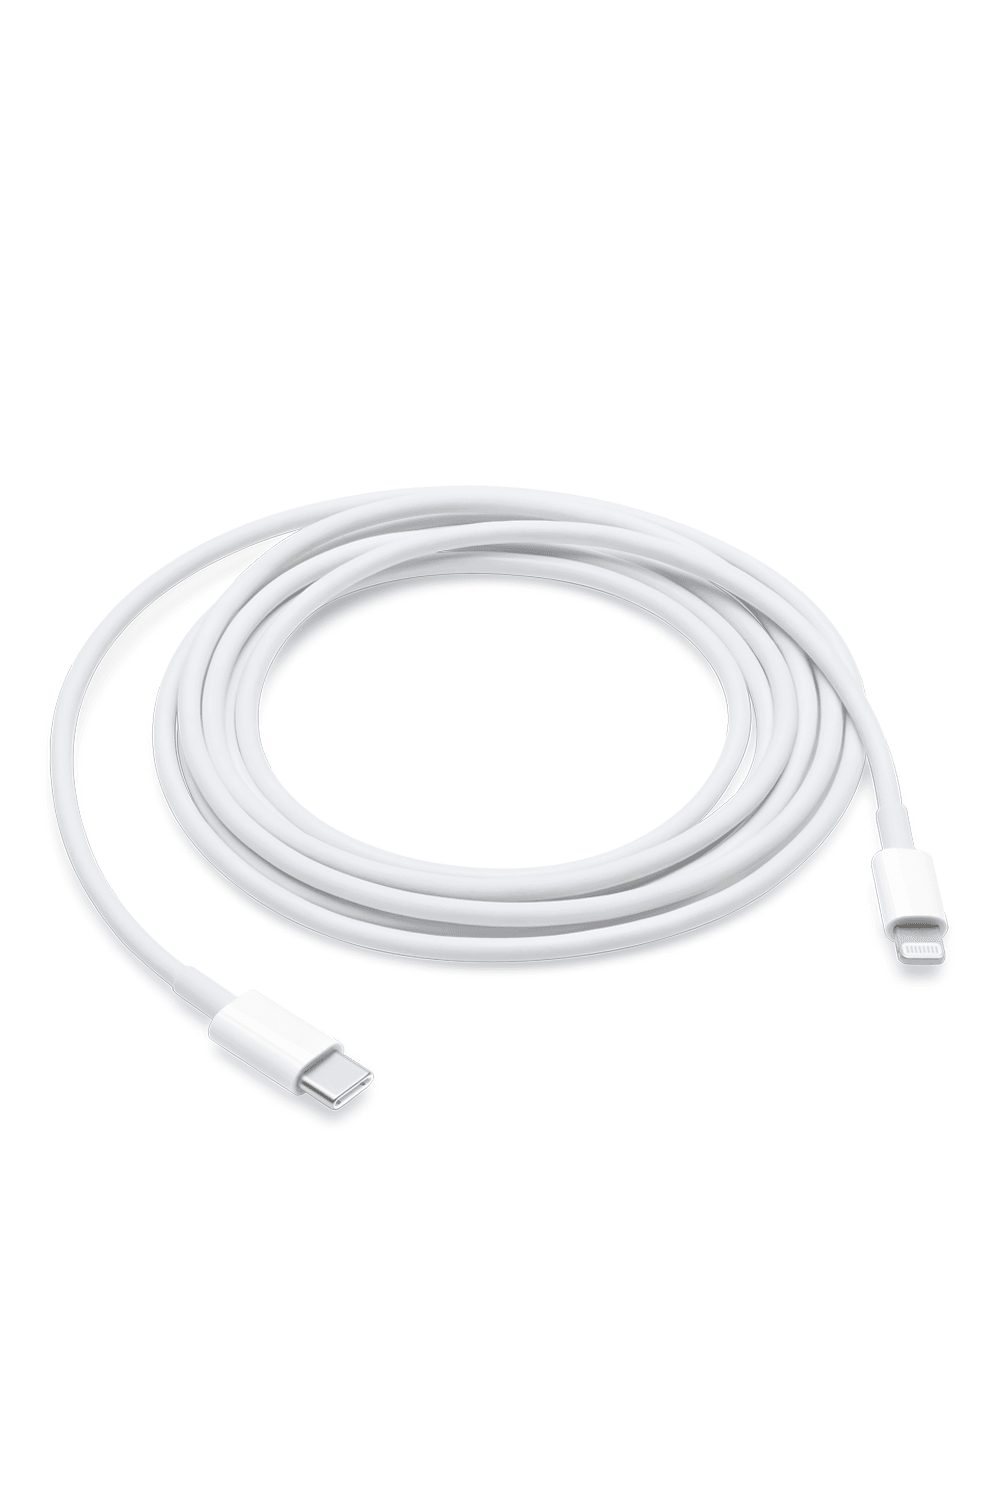 Apple USB C to Lightning Cable (1 m and 2 m) - QuickTech.in